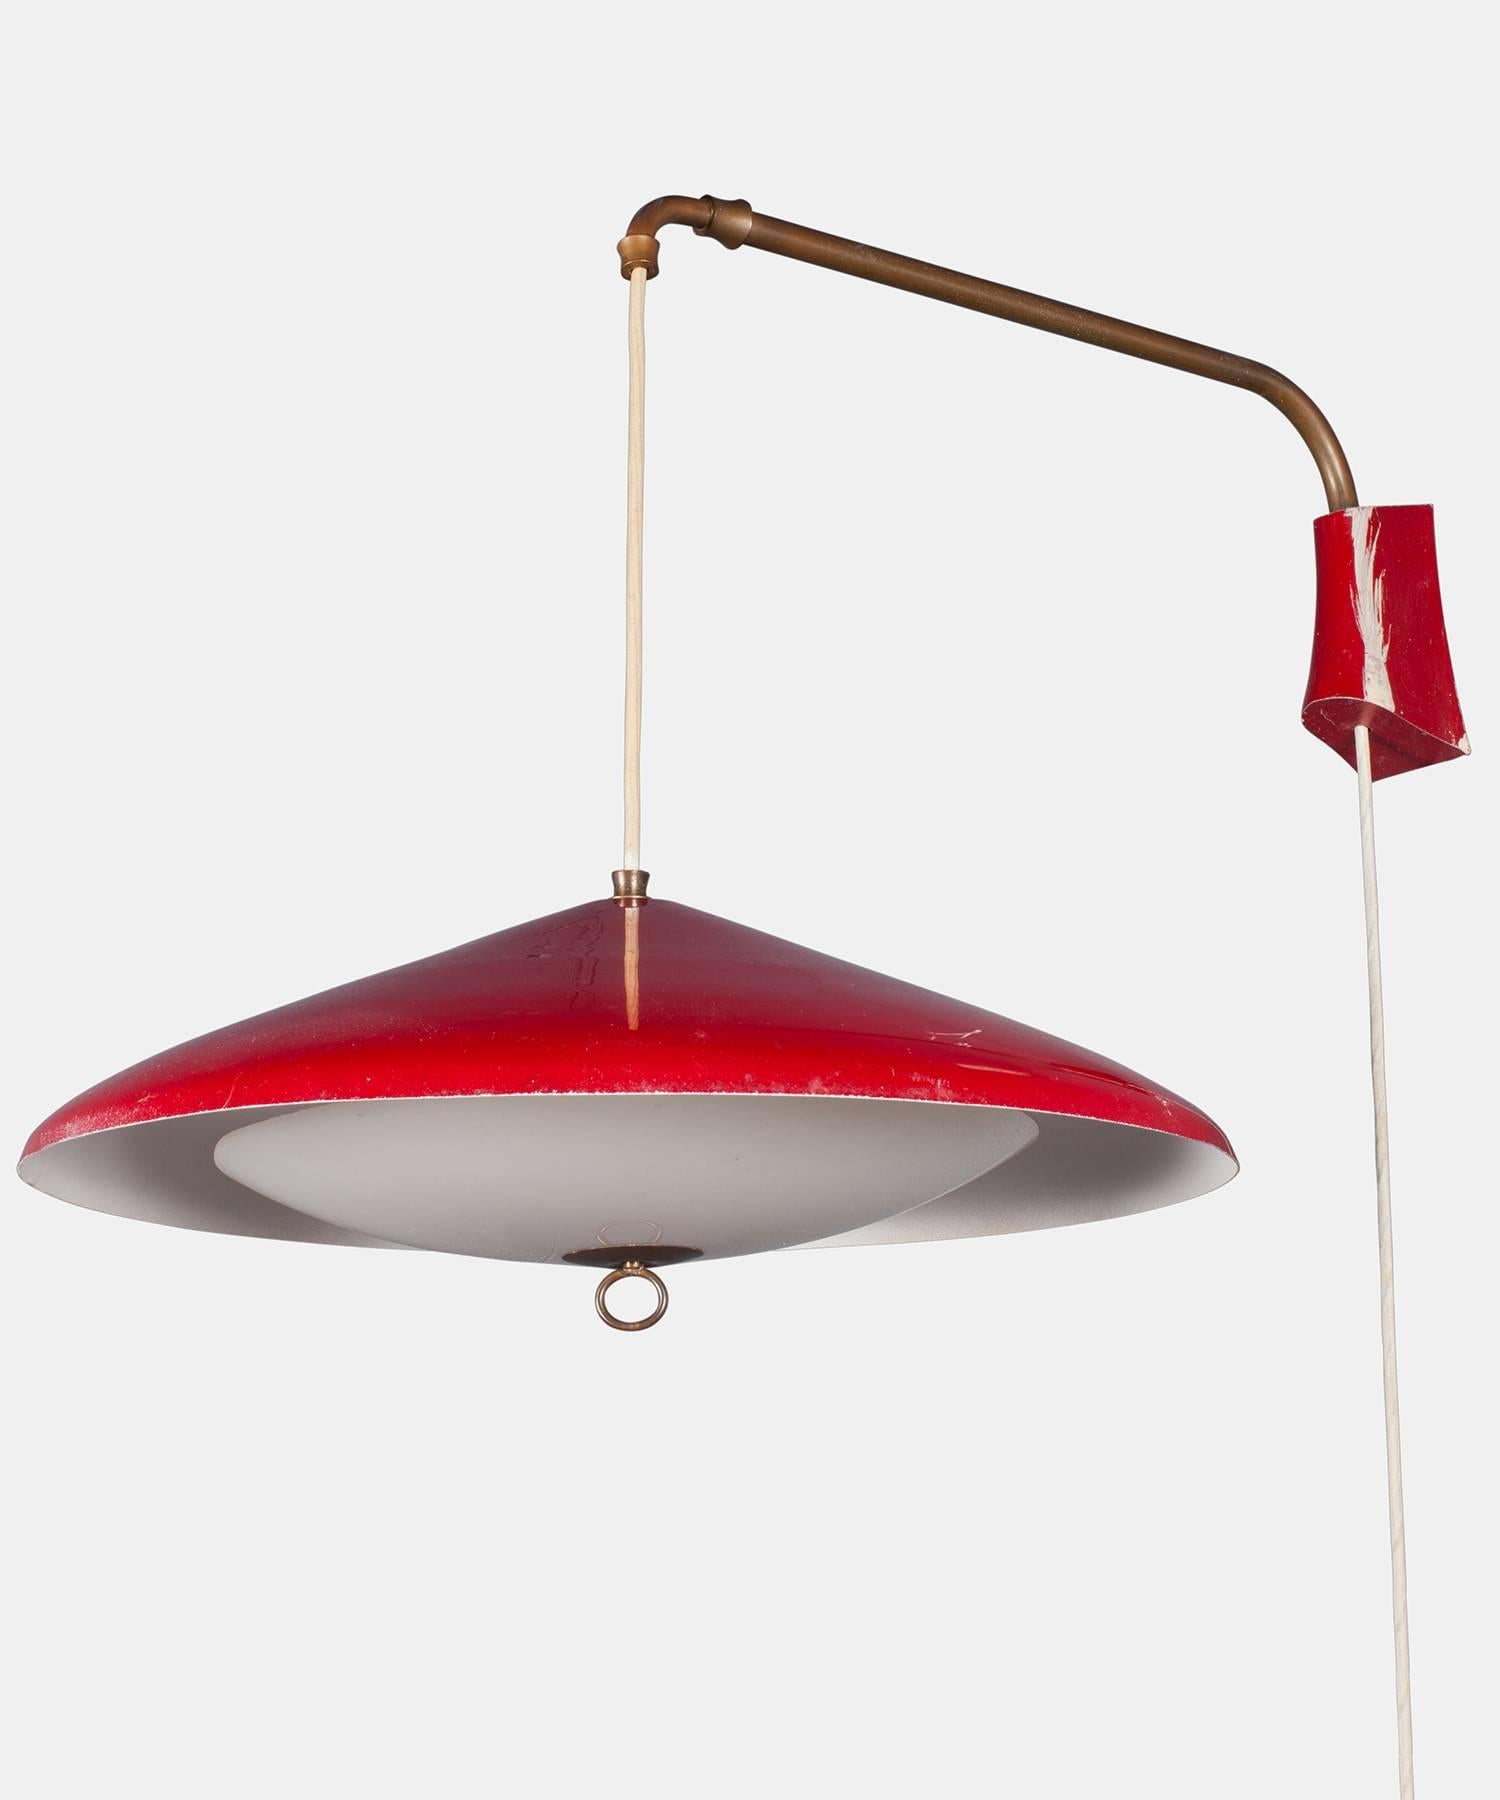 Red Modern Wall Mount Lamp, circa 1950

With red metal shade and wall mount. Includes articulating brass arm and a weight that enables fixture to change drop length.

7